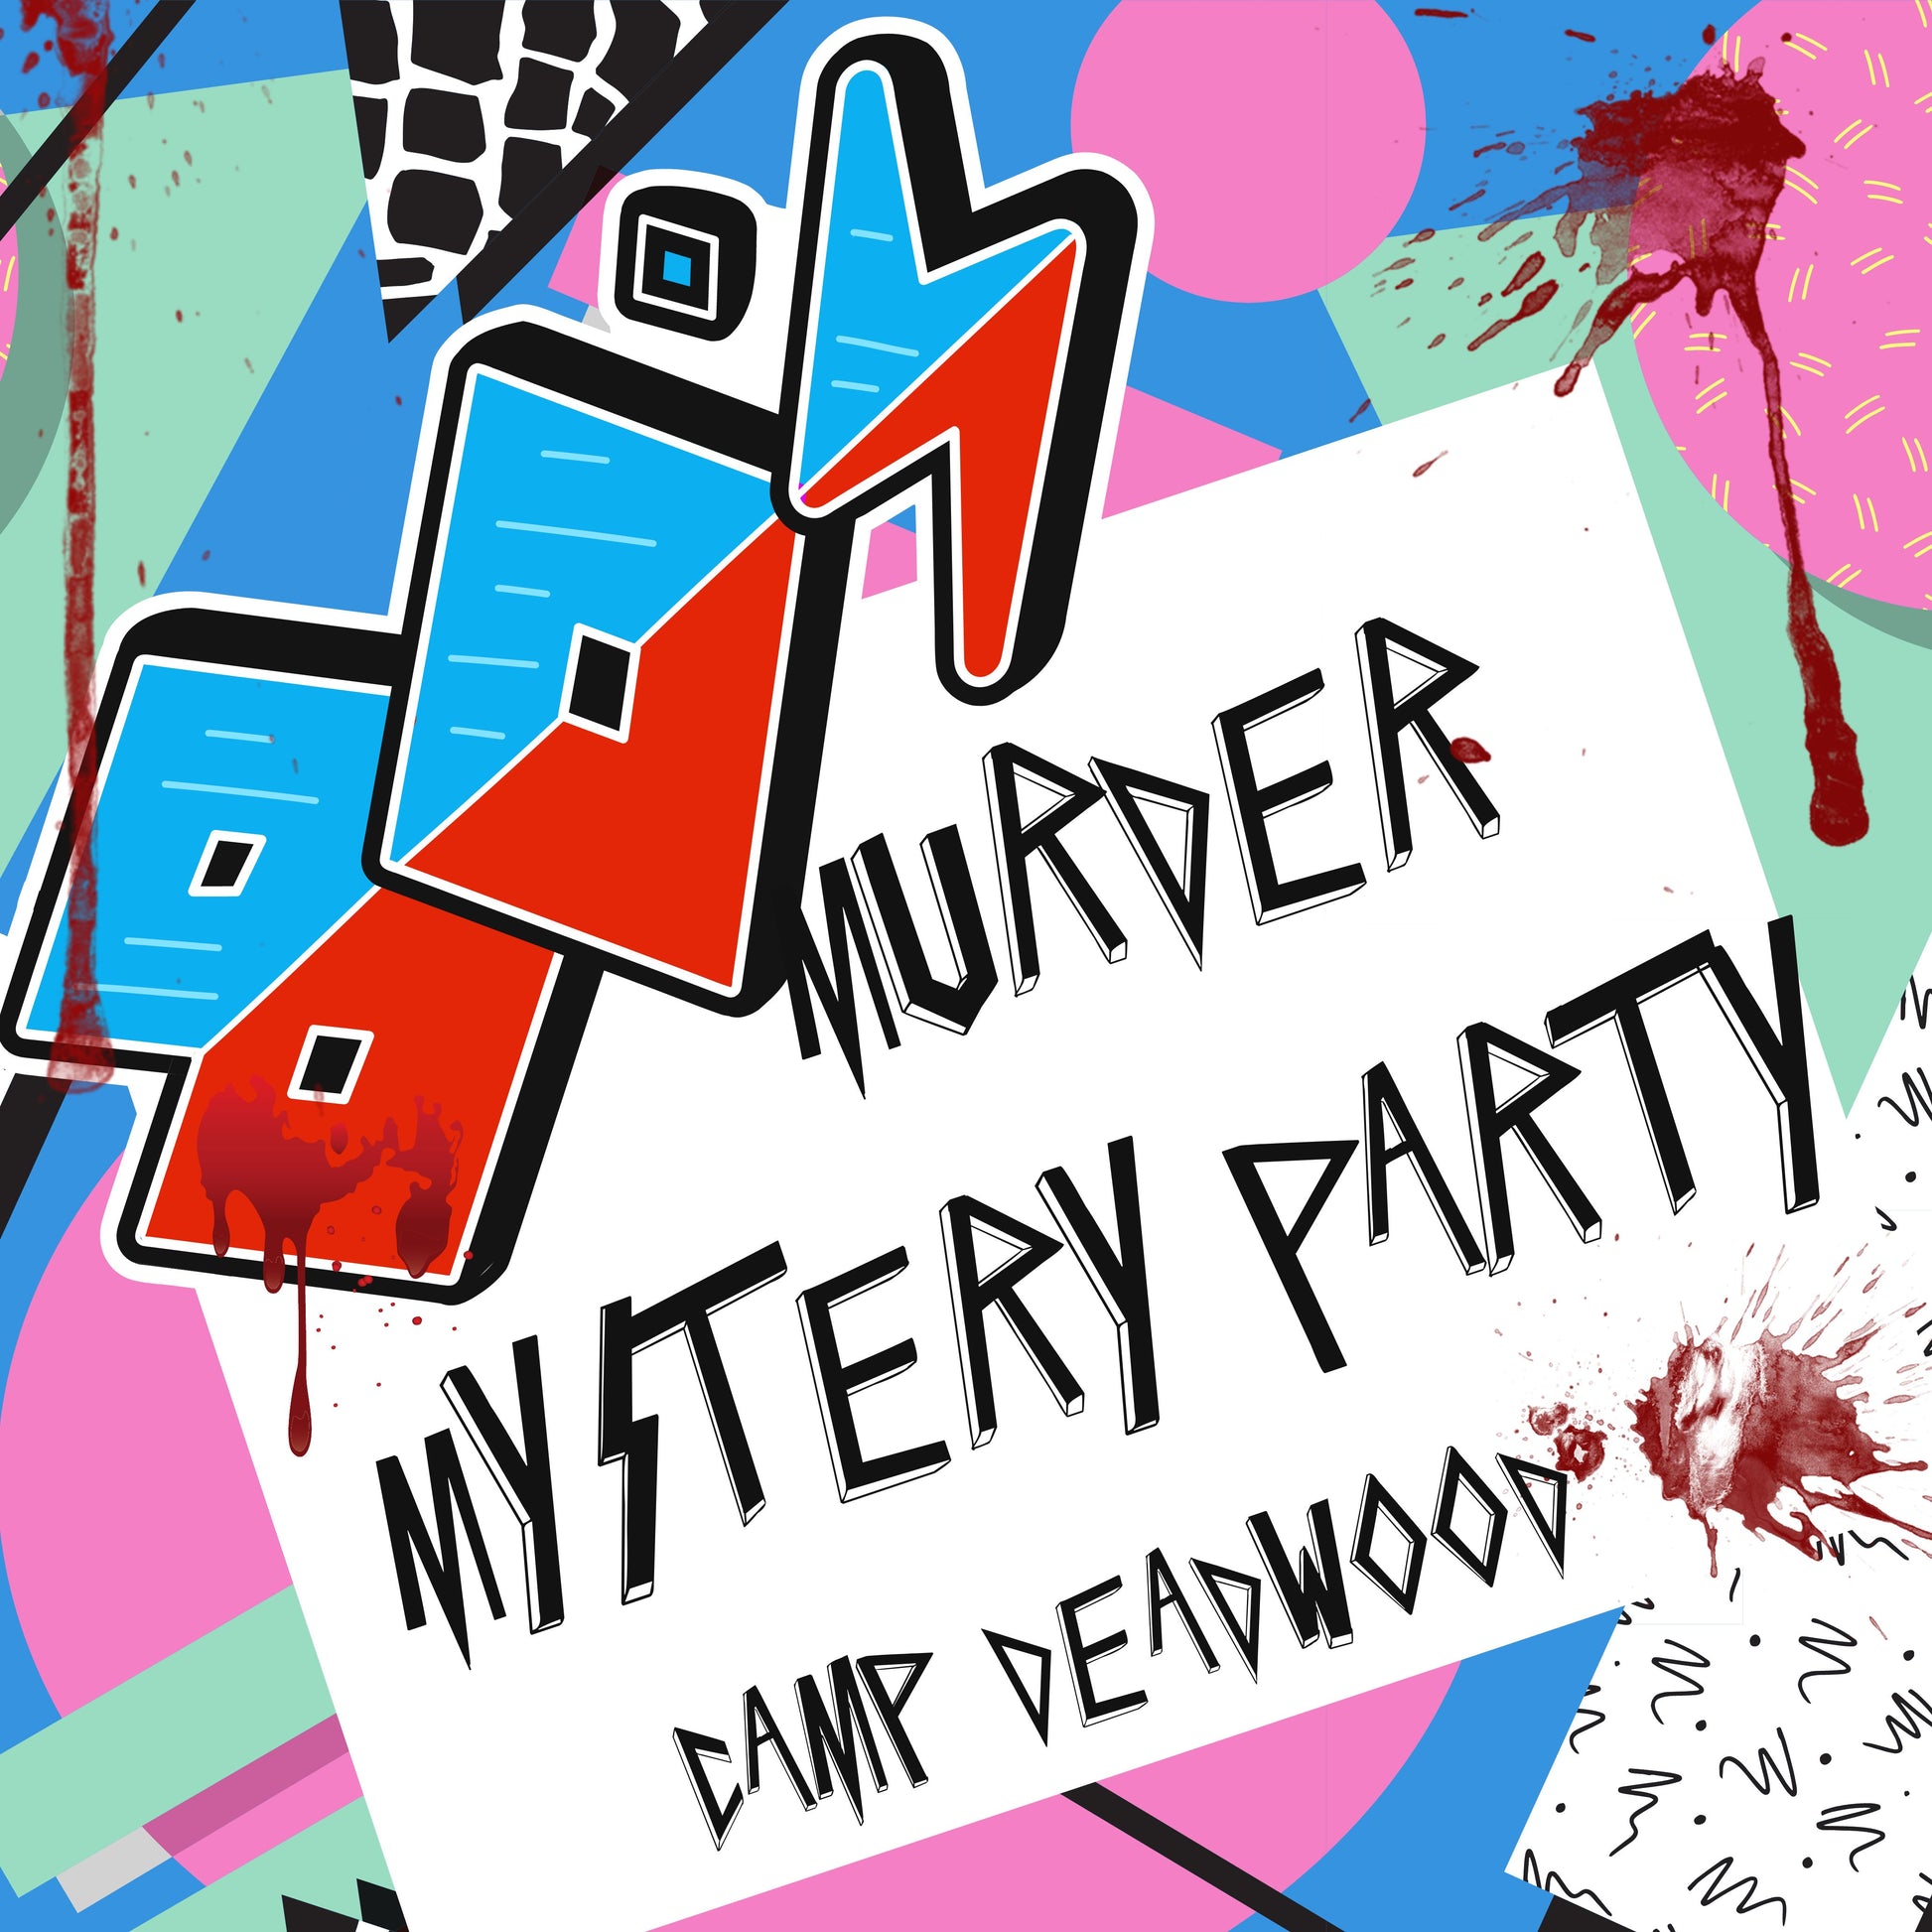 Fun and colourful fully scripted 1980s themed murder mystery party game for 5-10 players